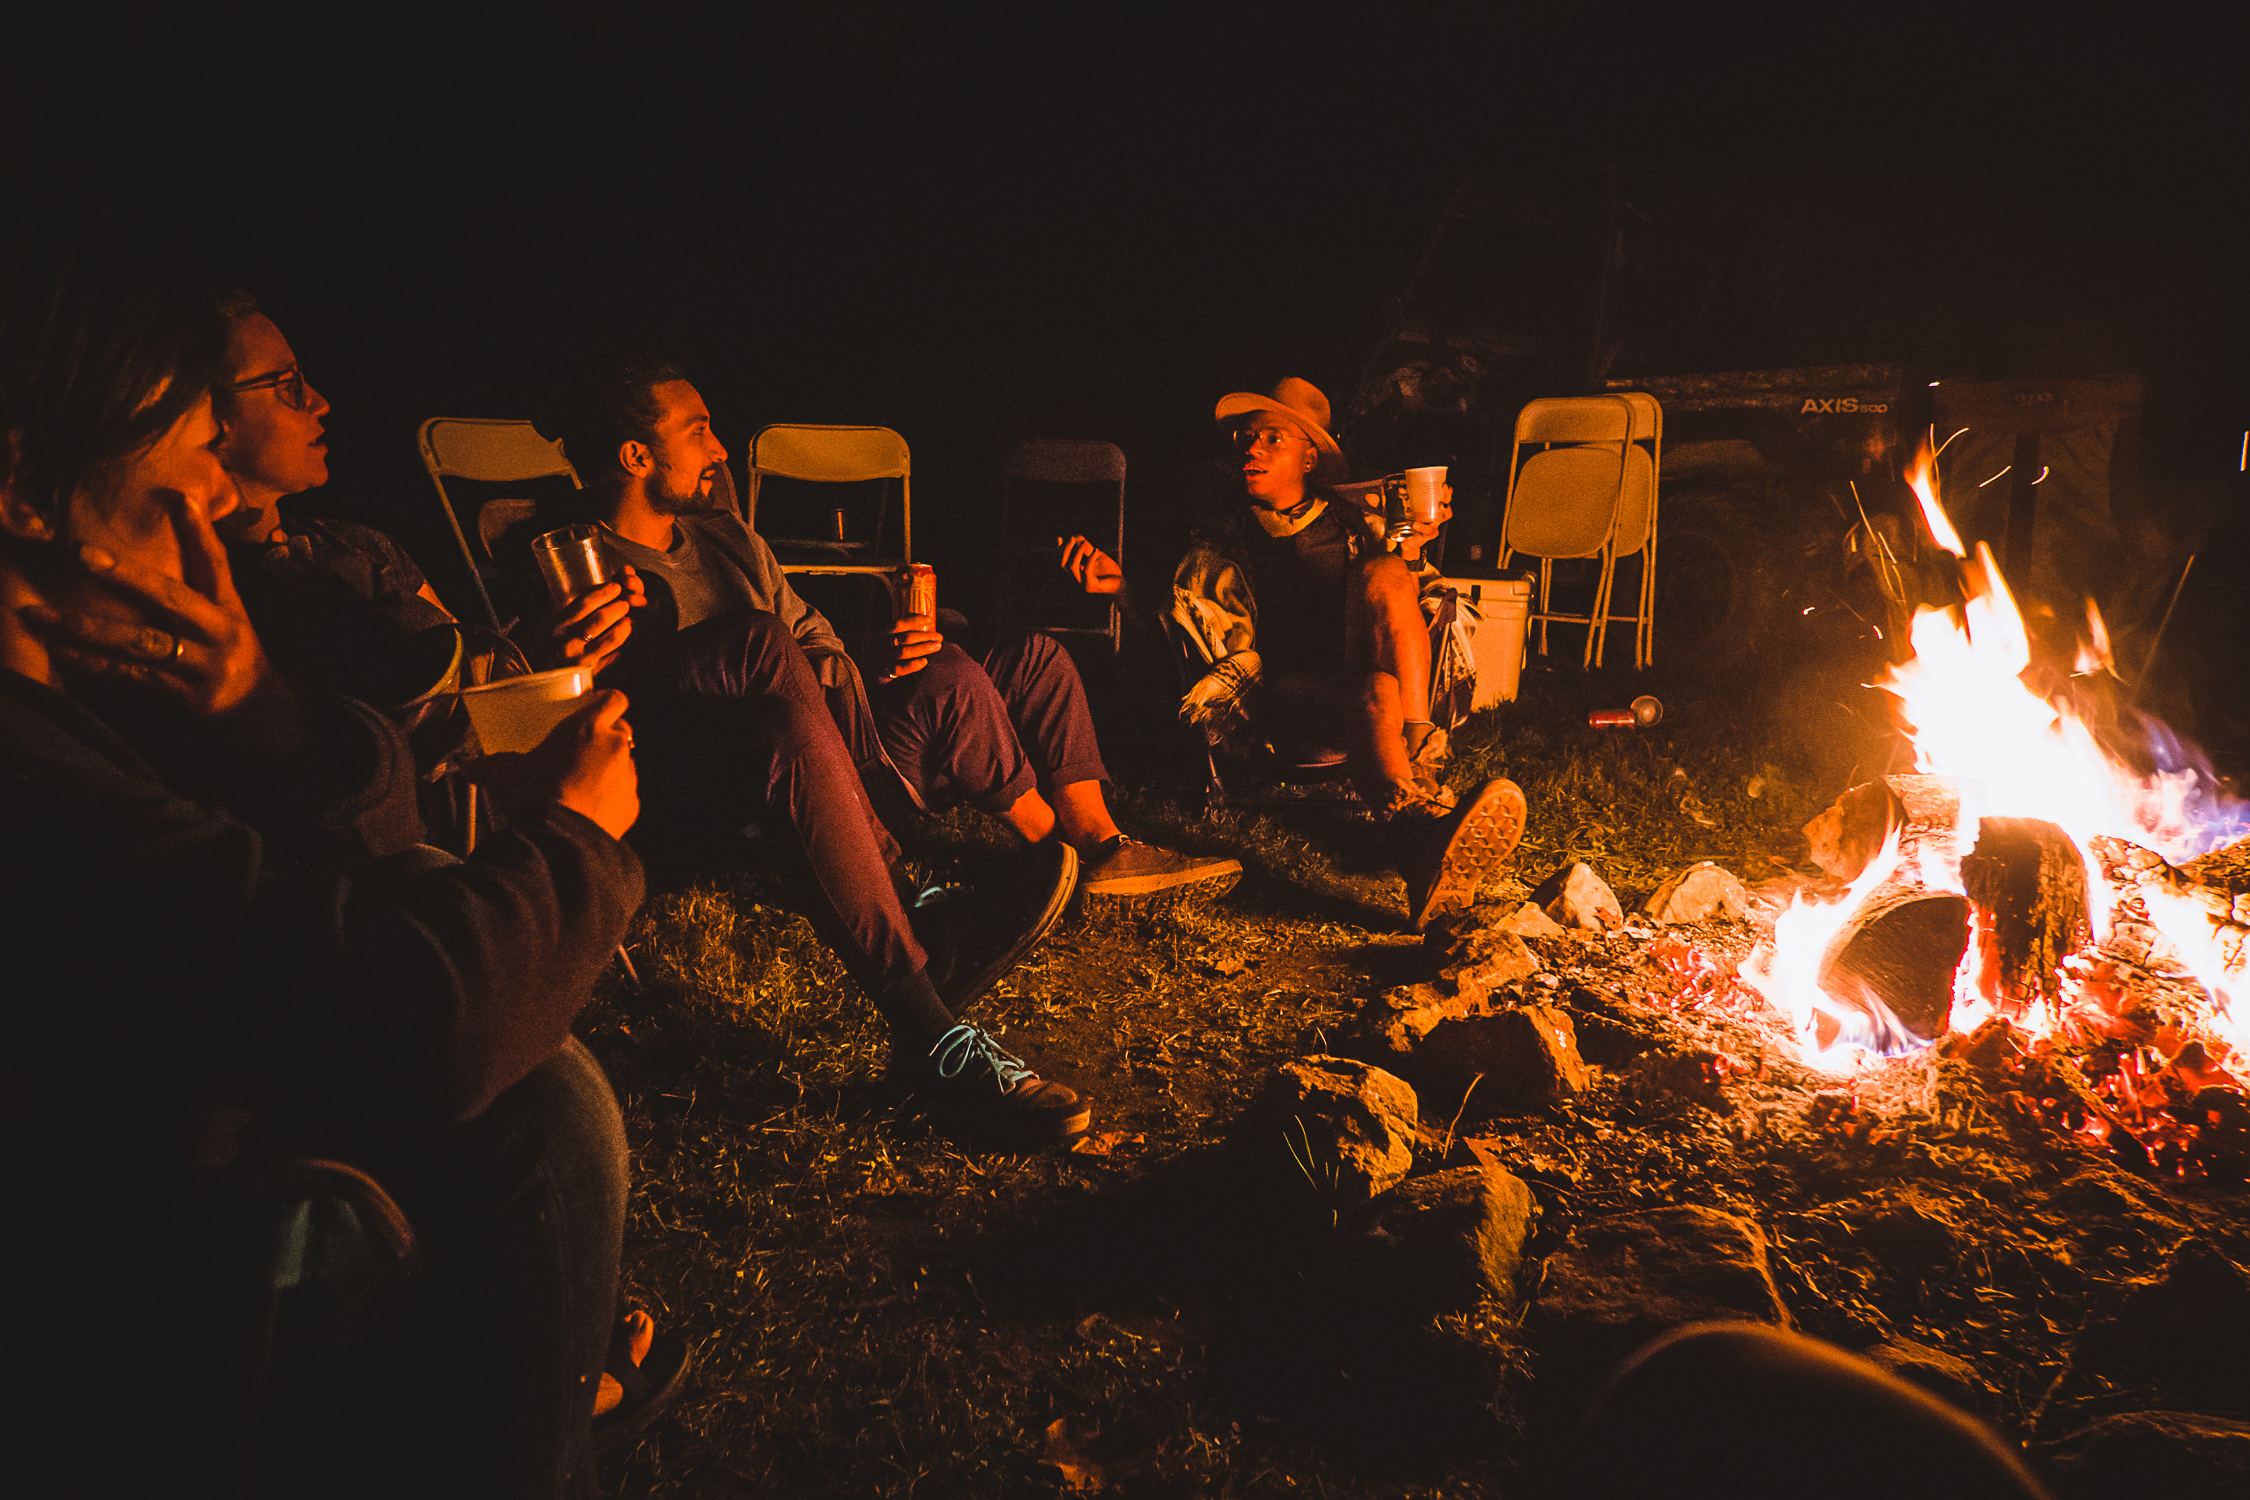 Folks sit around a campfire outside at night.